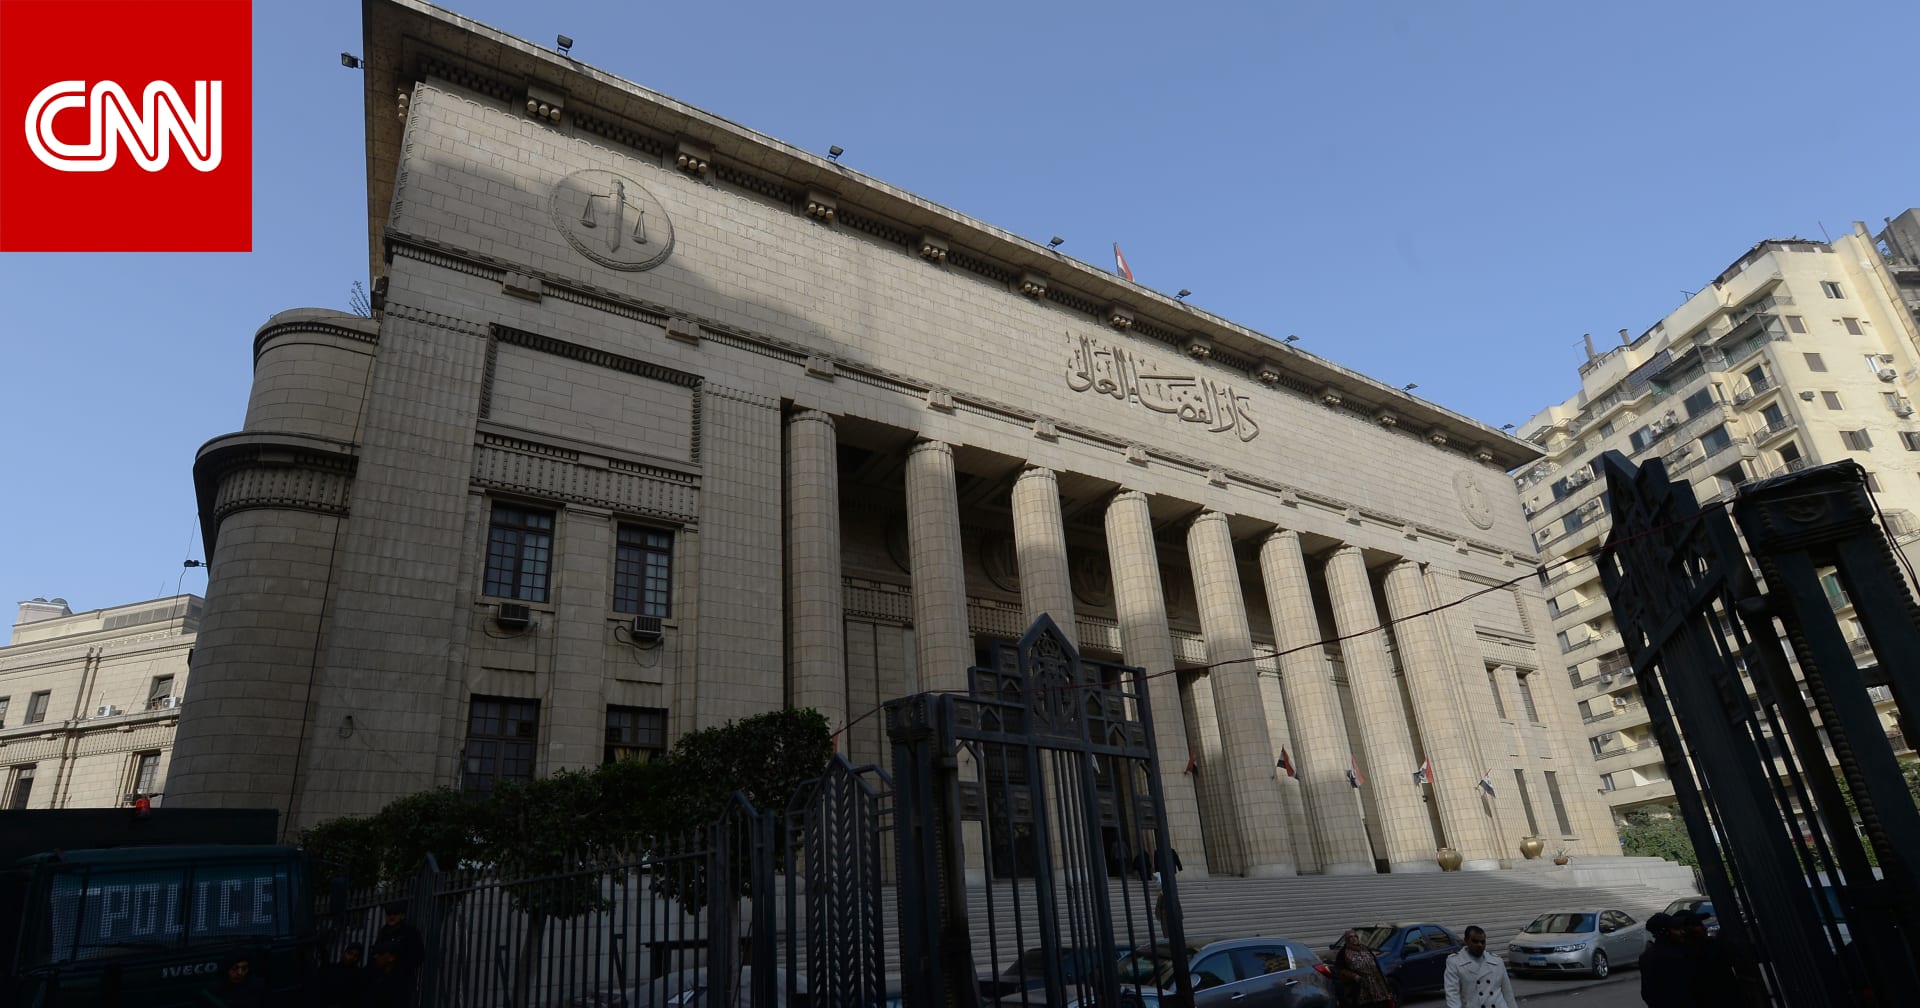 Egyptian businessman Mohamed El-Amin was sentenced to 3 years in prison after being convicted of human trafficking and indecent assault